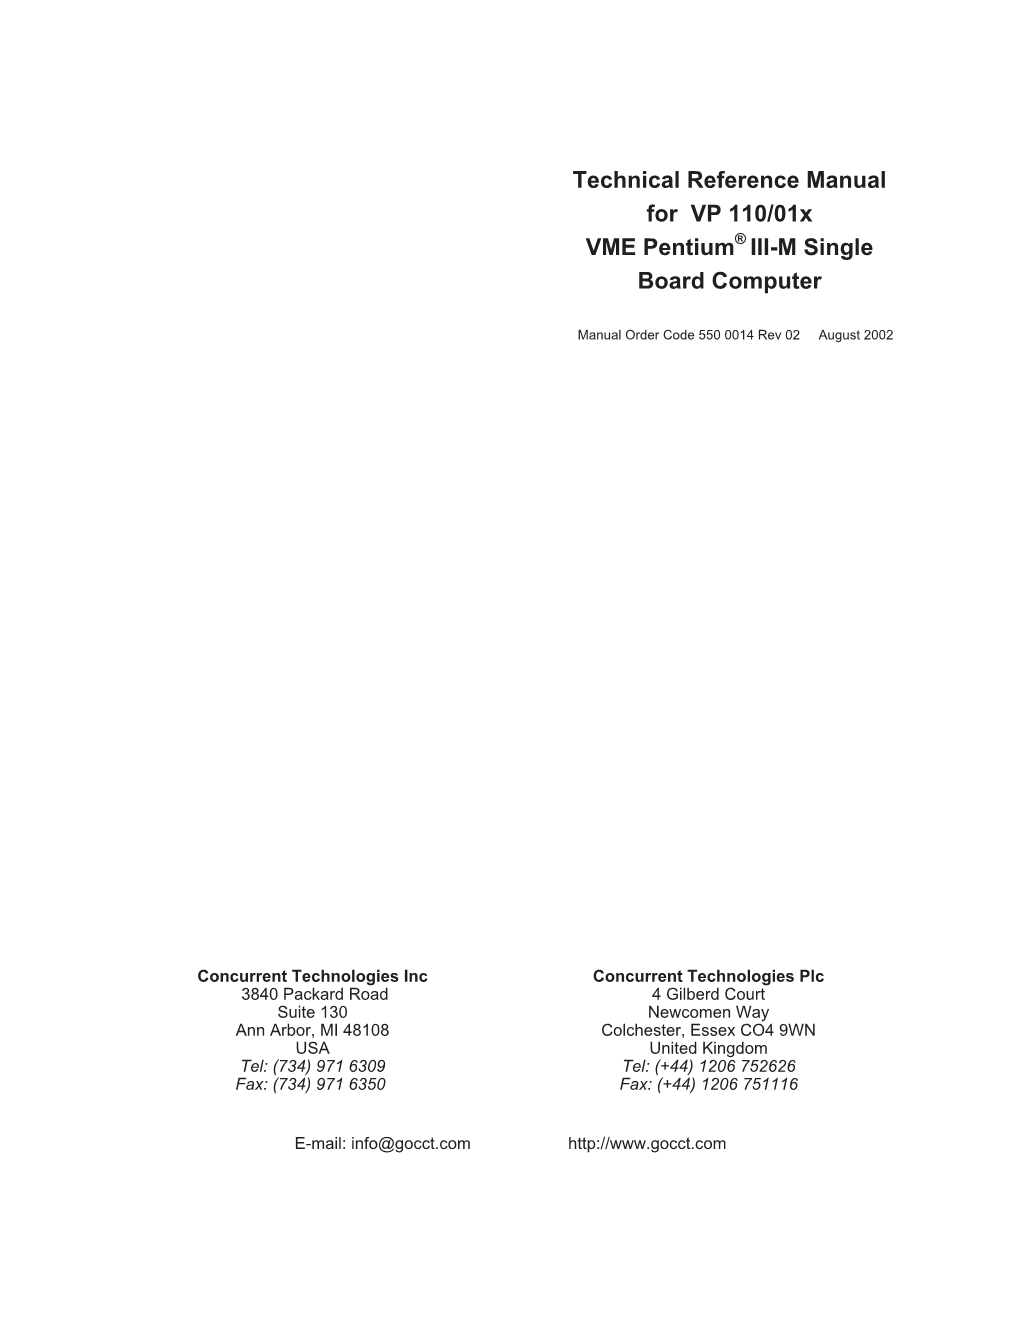 Technical Reference Manual for VP 110/01X VME Pentium® III-M Single Board Computer